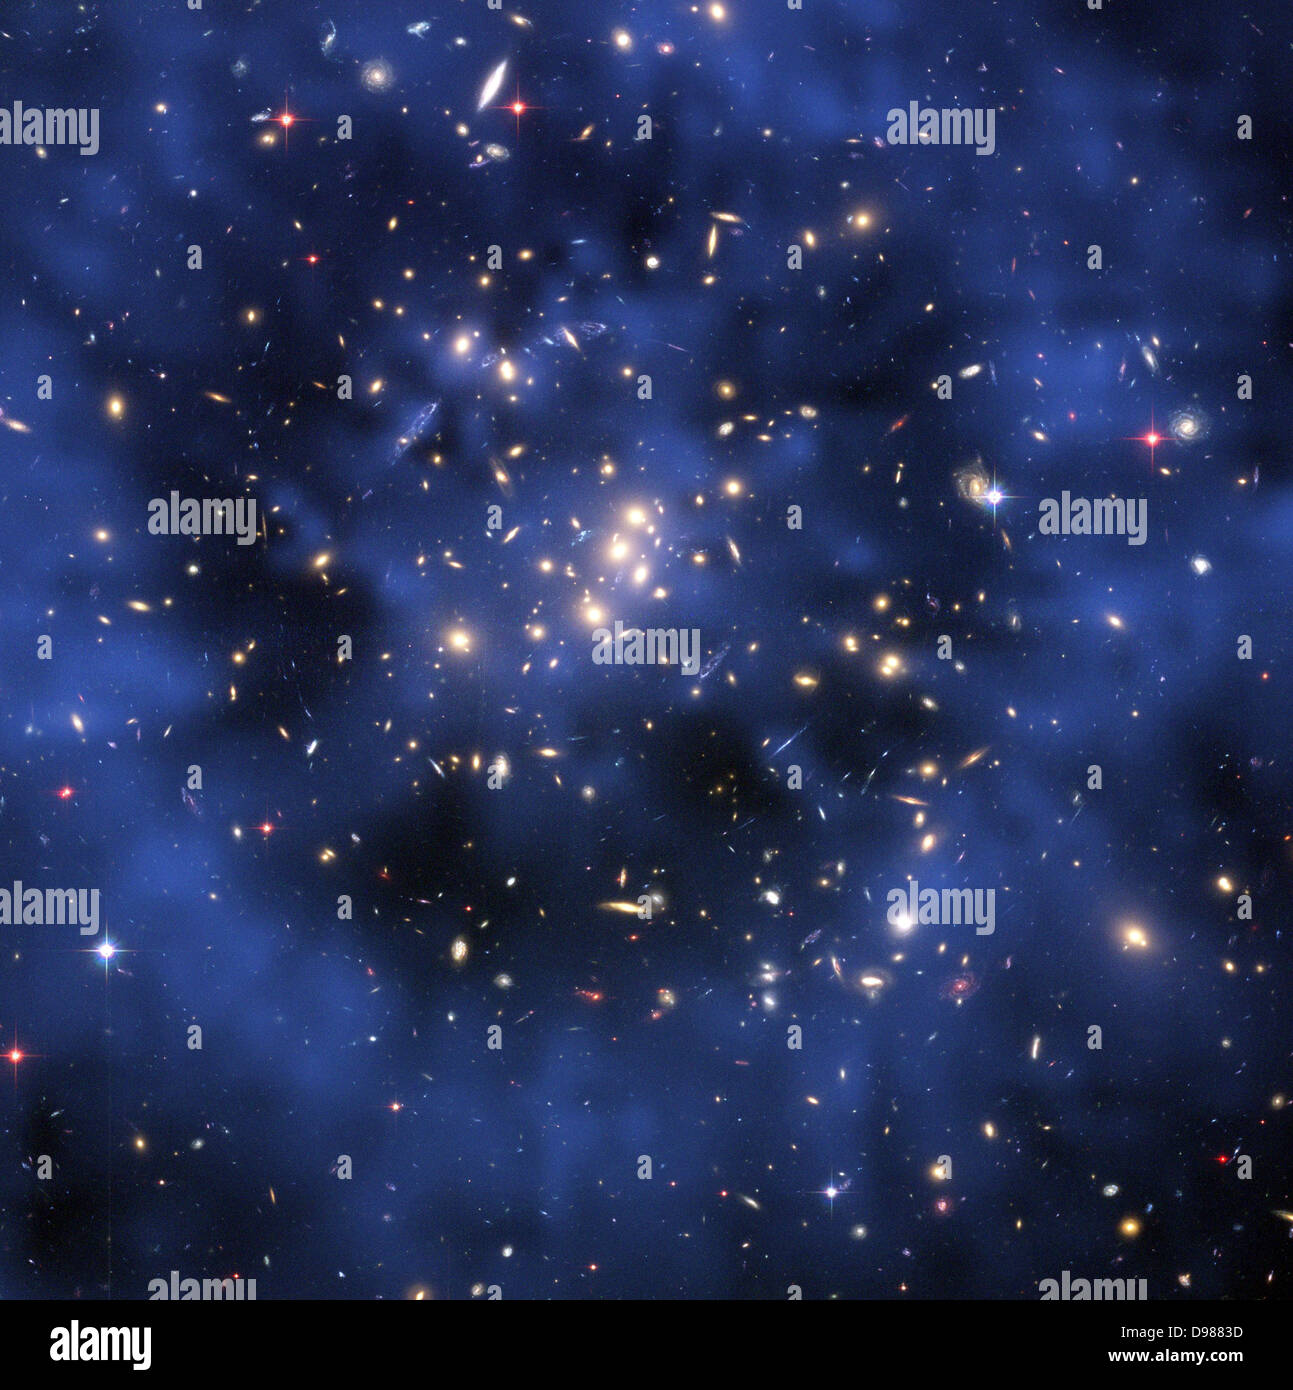 Hubble composite image showing the ring of dark matter in the galaxy cluster Cl 0024+17. The ring-like structure is evident in Stock Photo